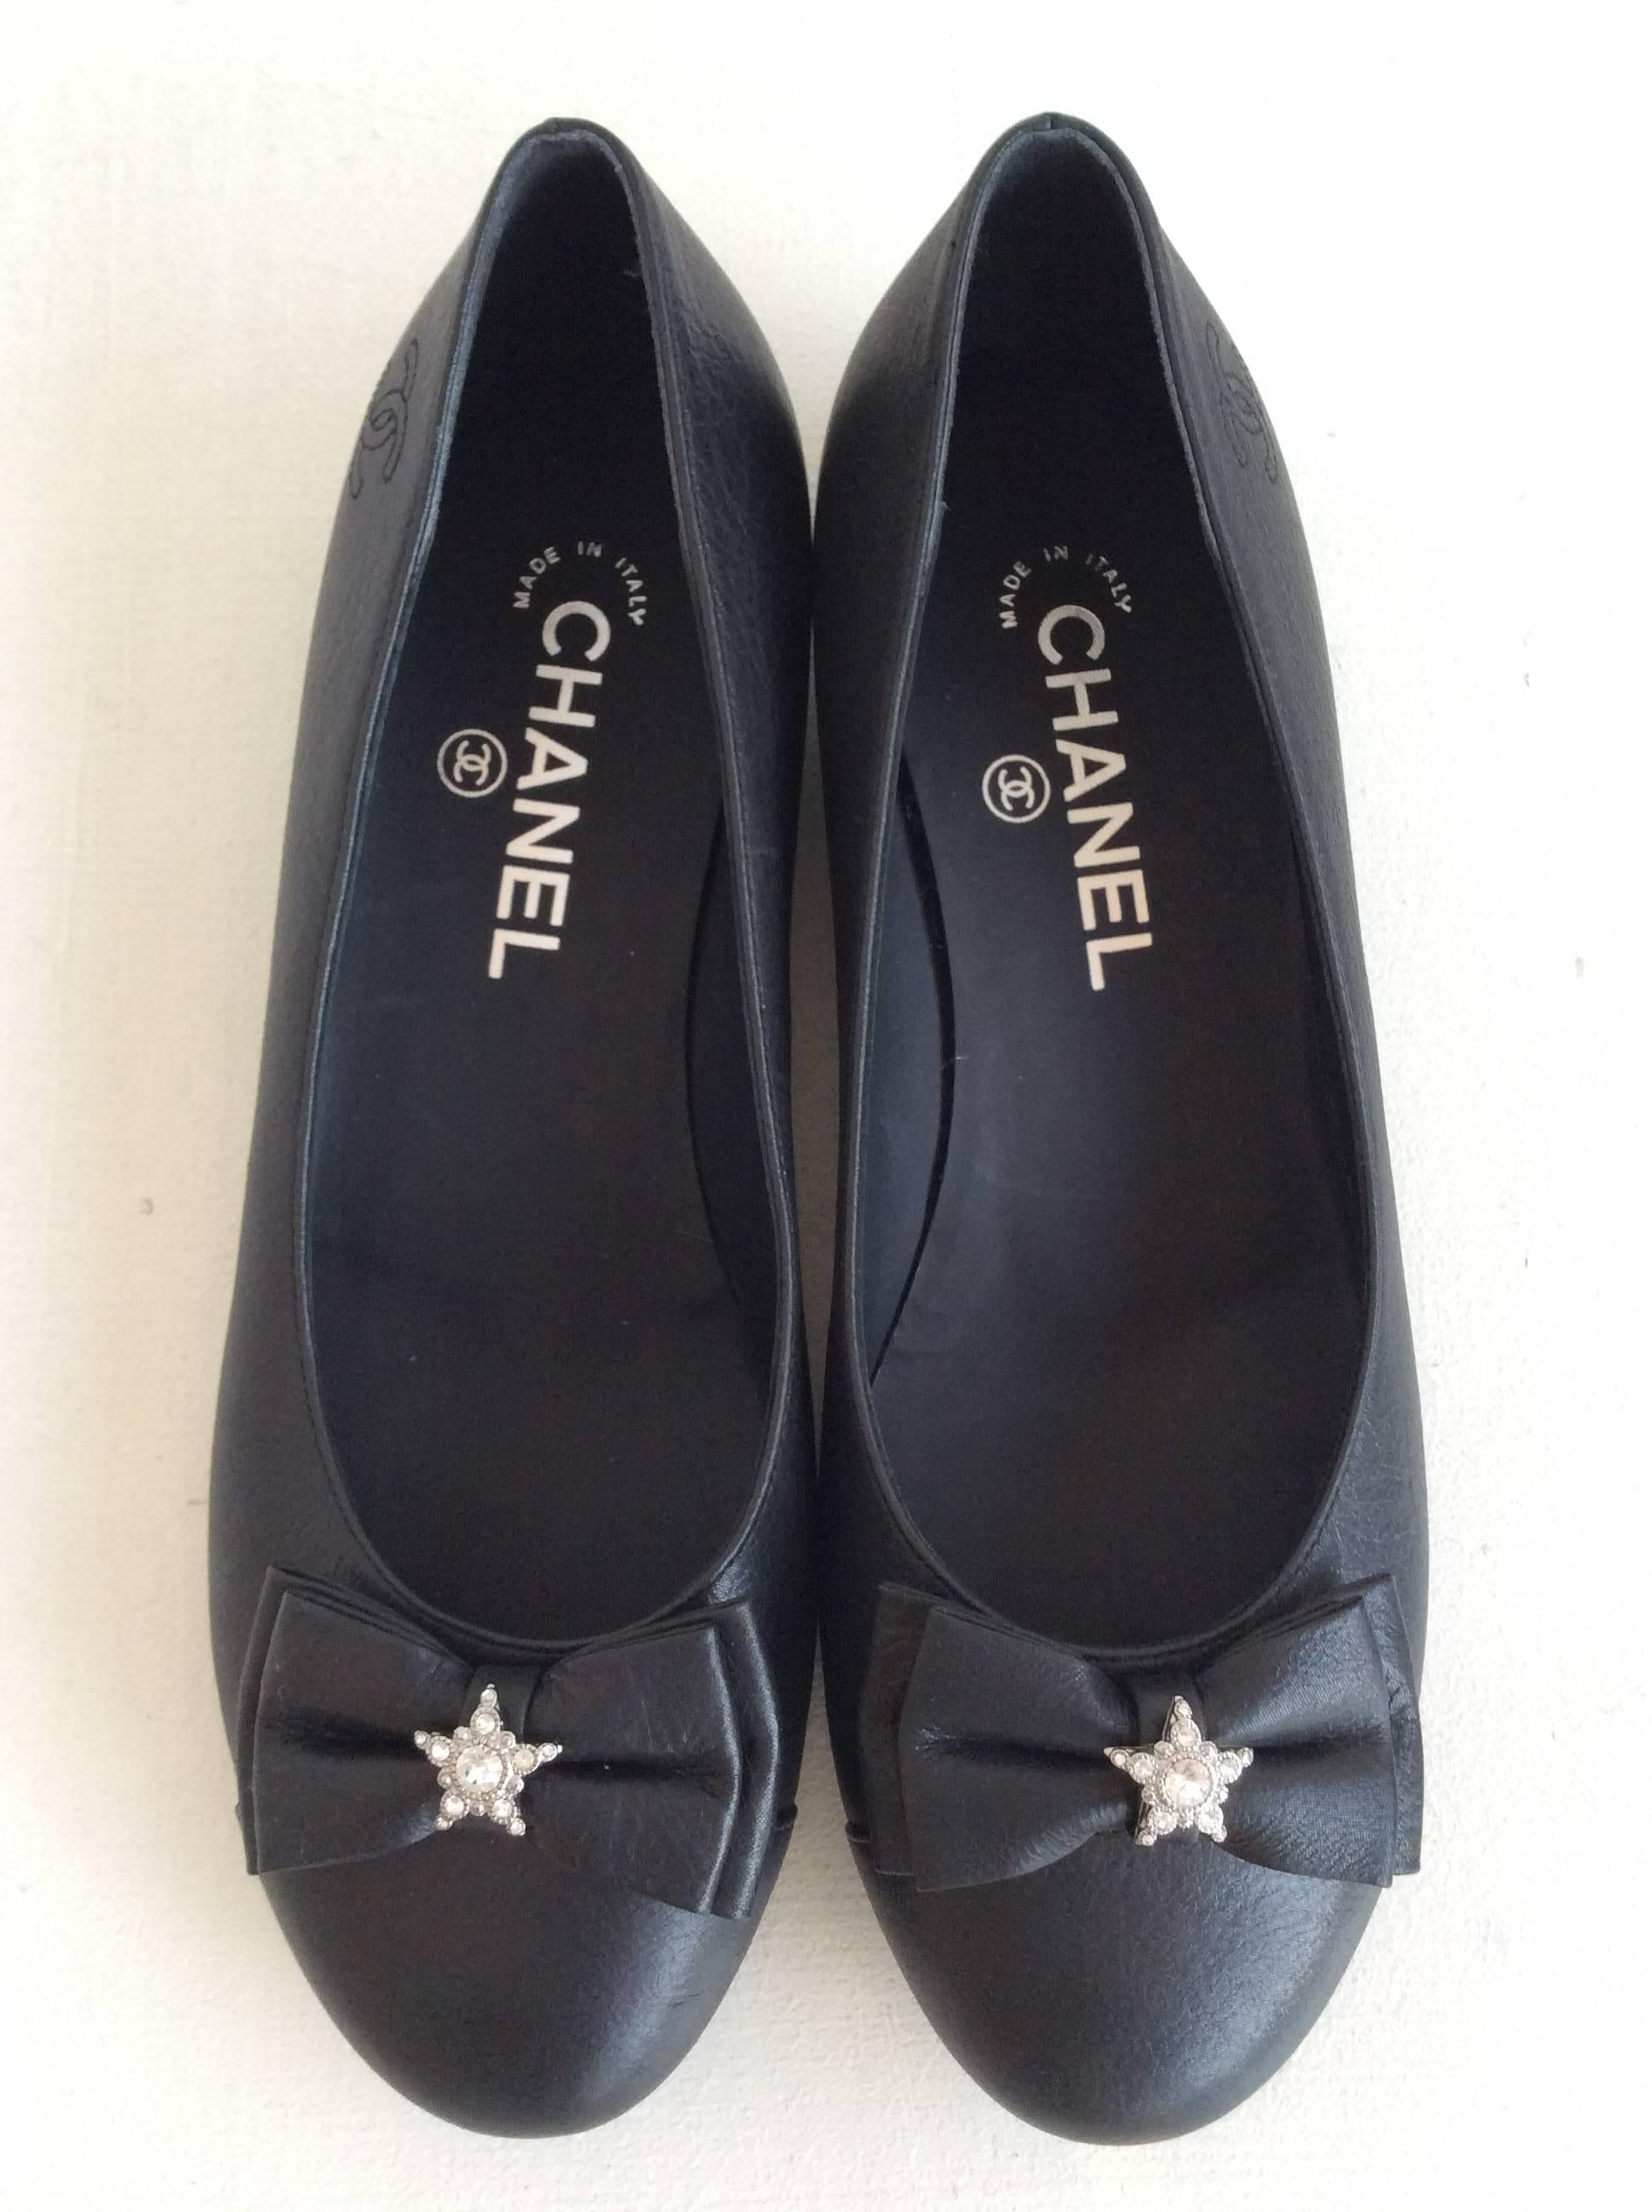 Chanel black leather ballerina flats with bow detail on the toe. The center of the bow has a small clear rhinestone star as an accent.